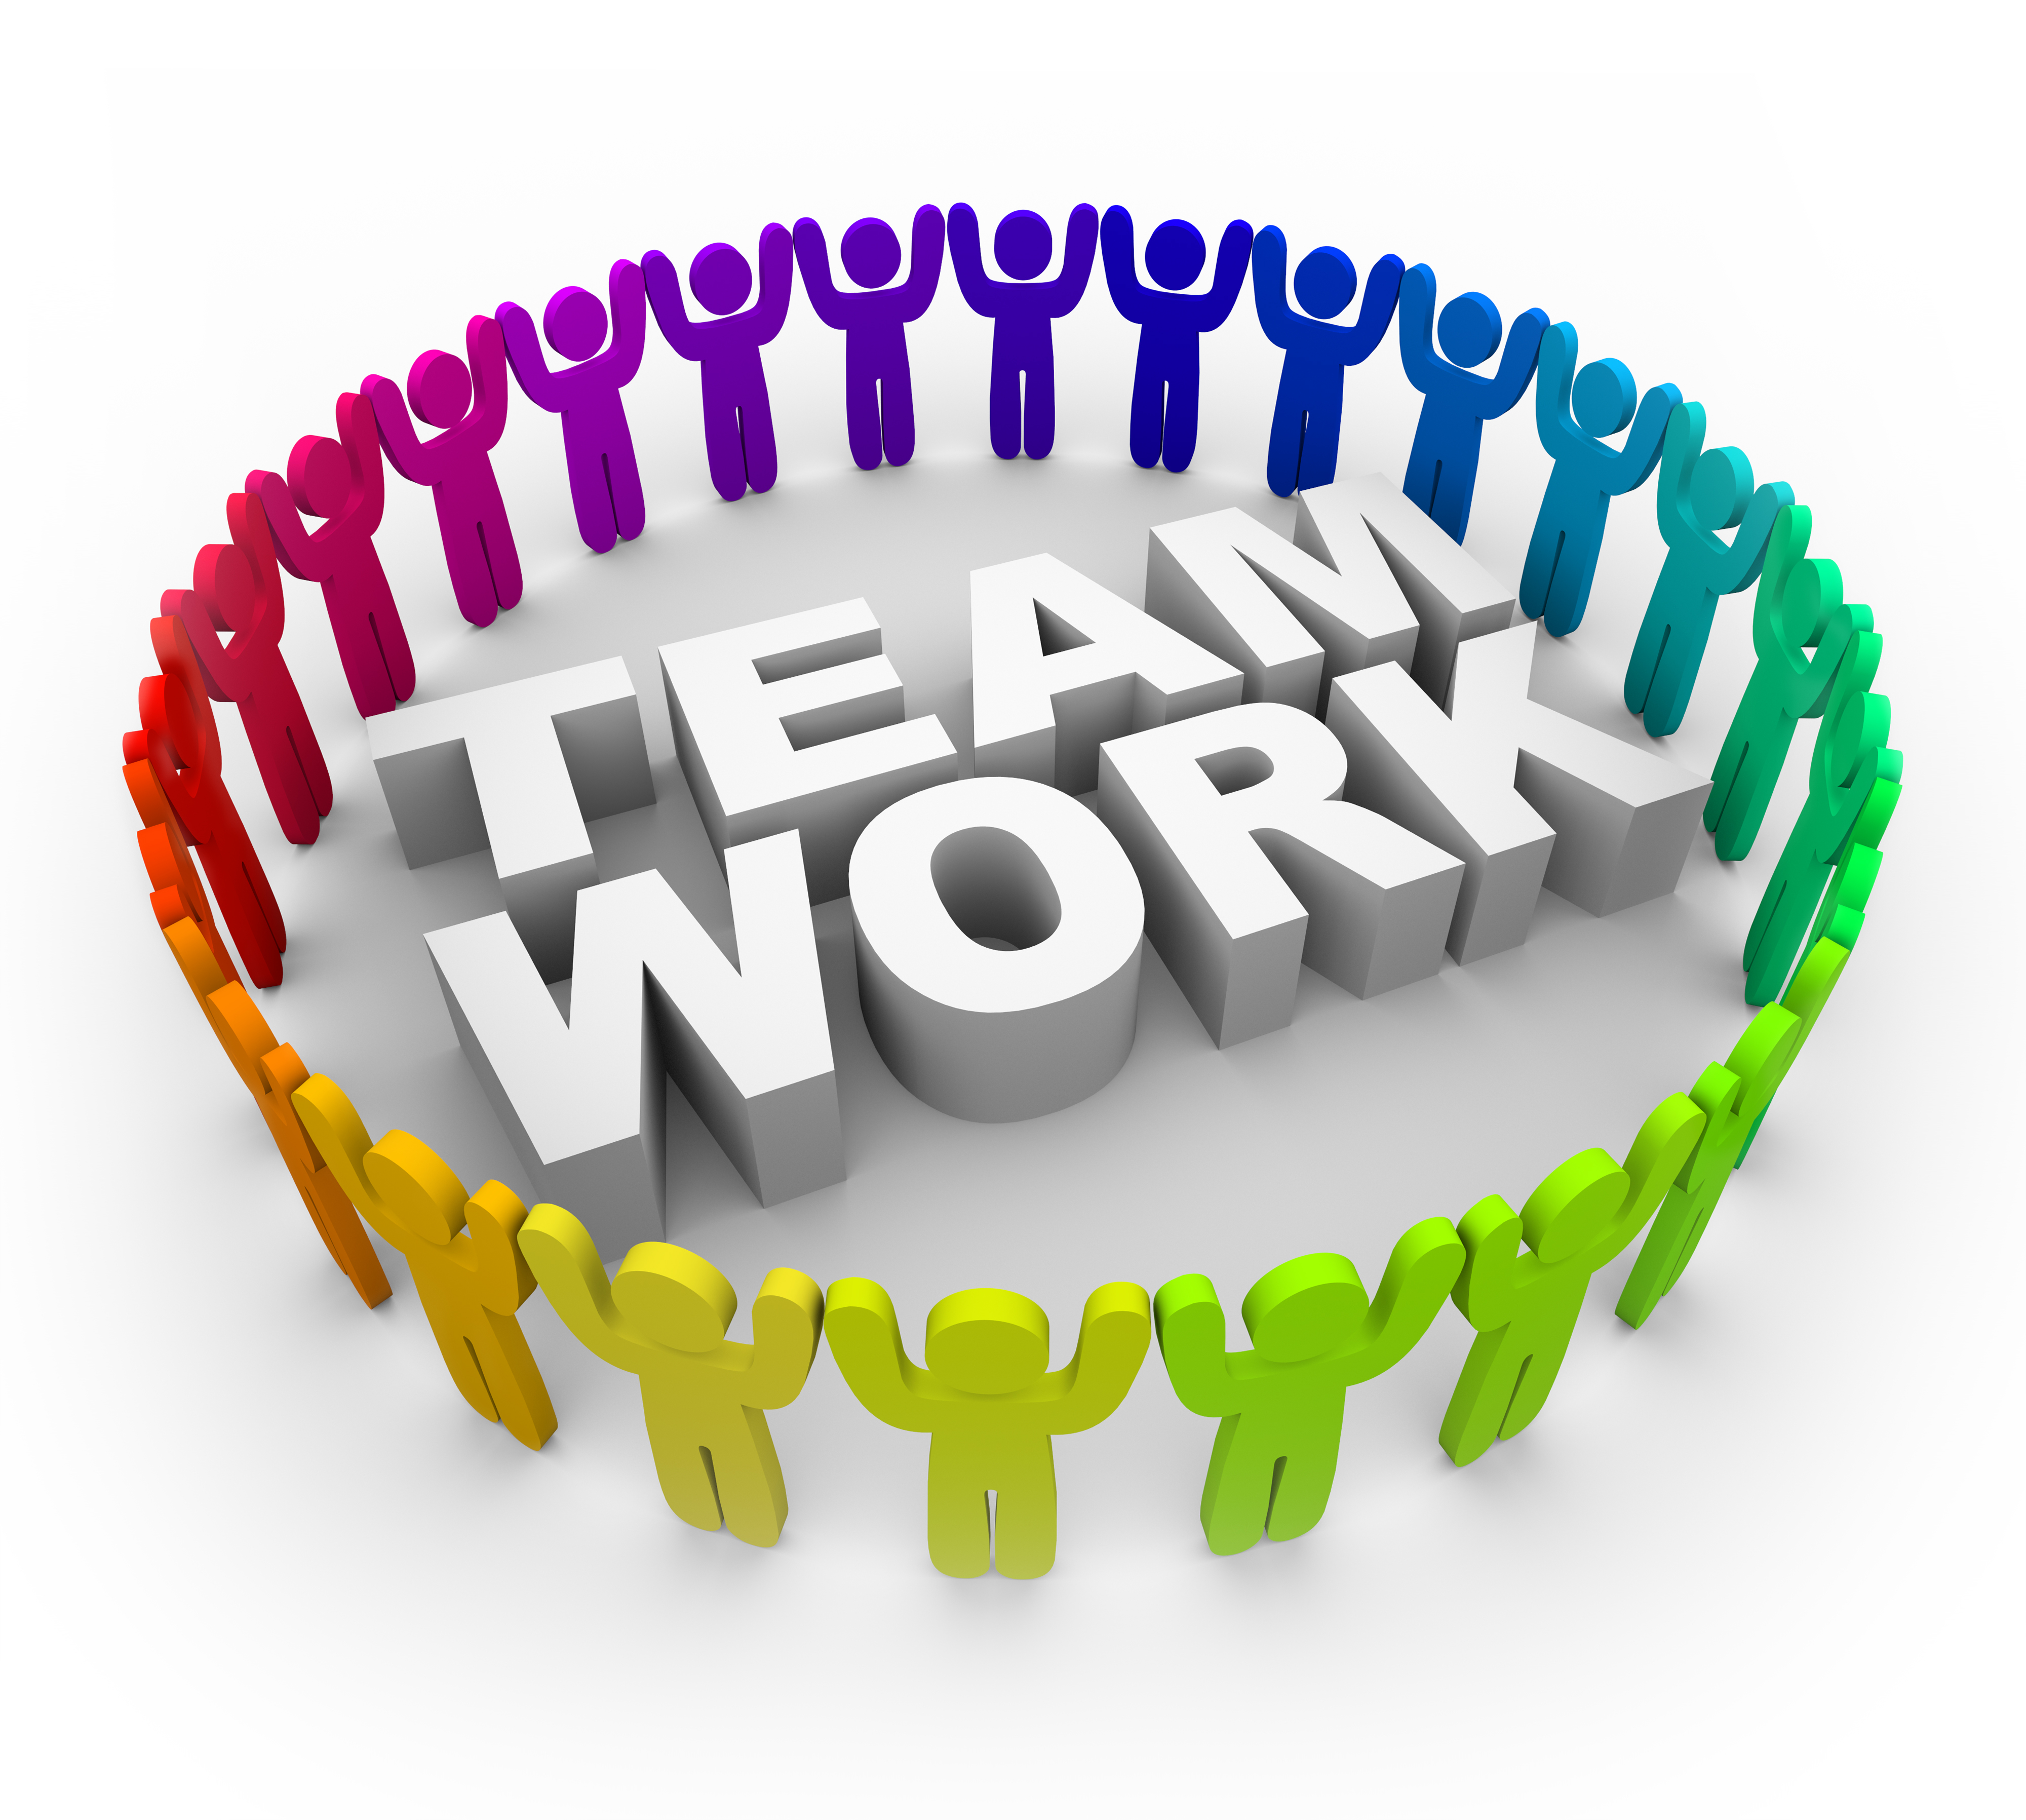 free clipart images for teamwork - photo #5